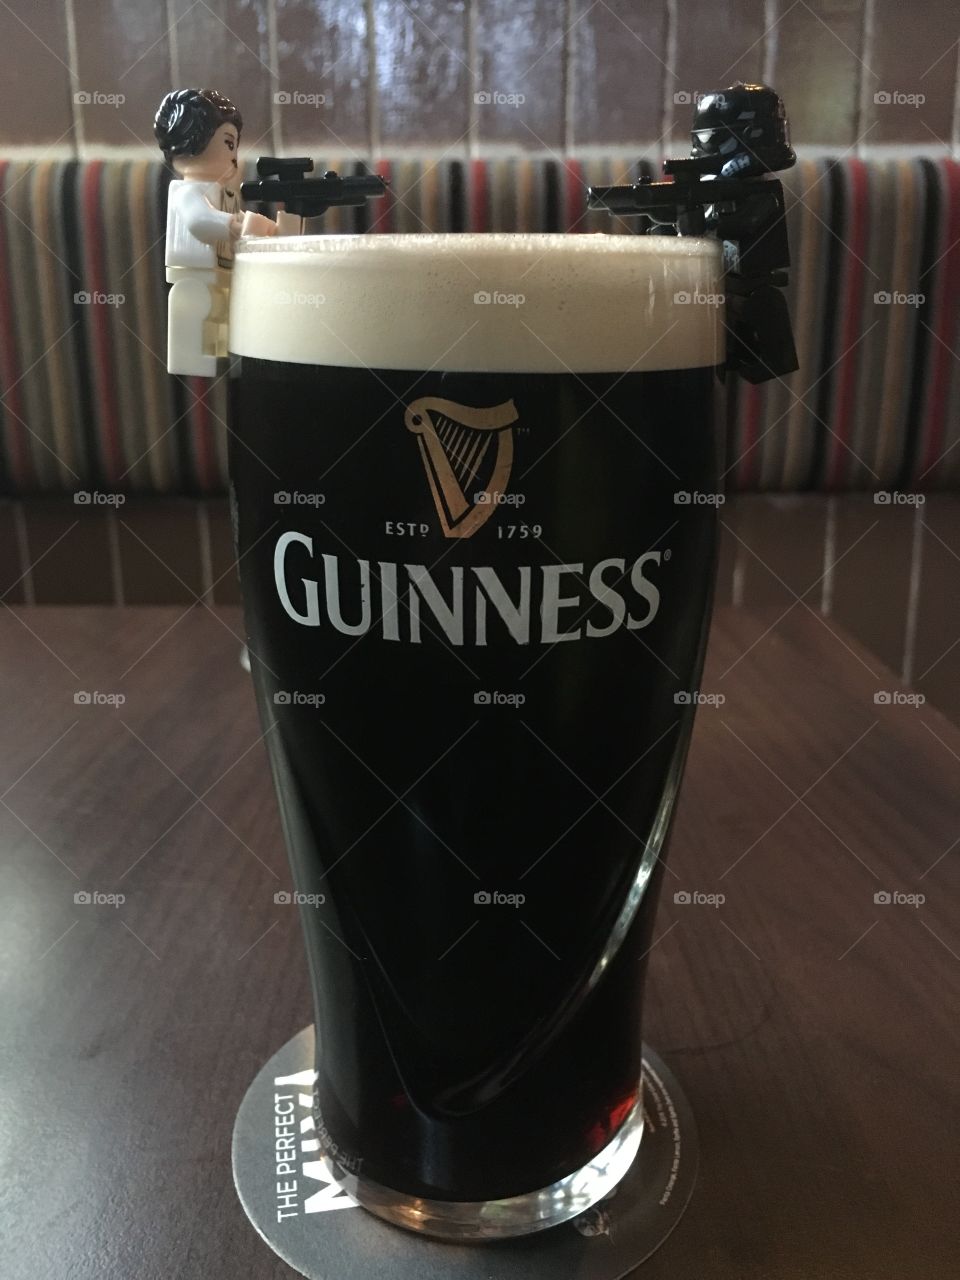 Lego Guinness face off